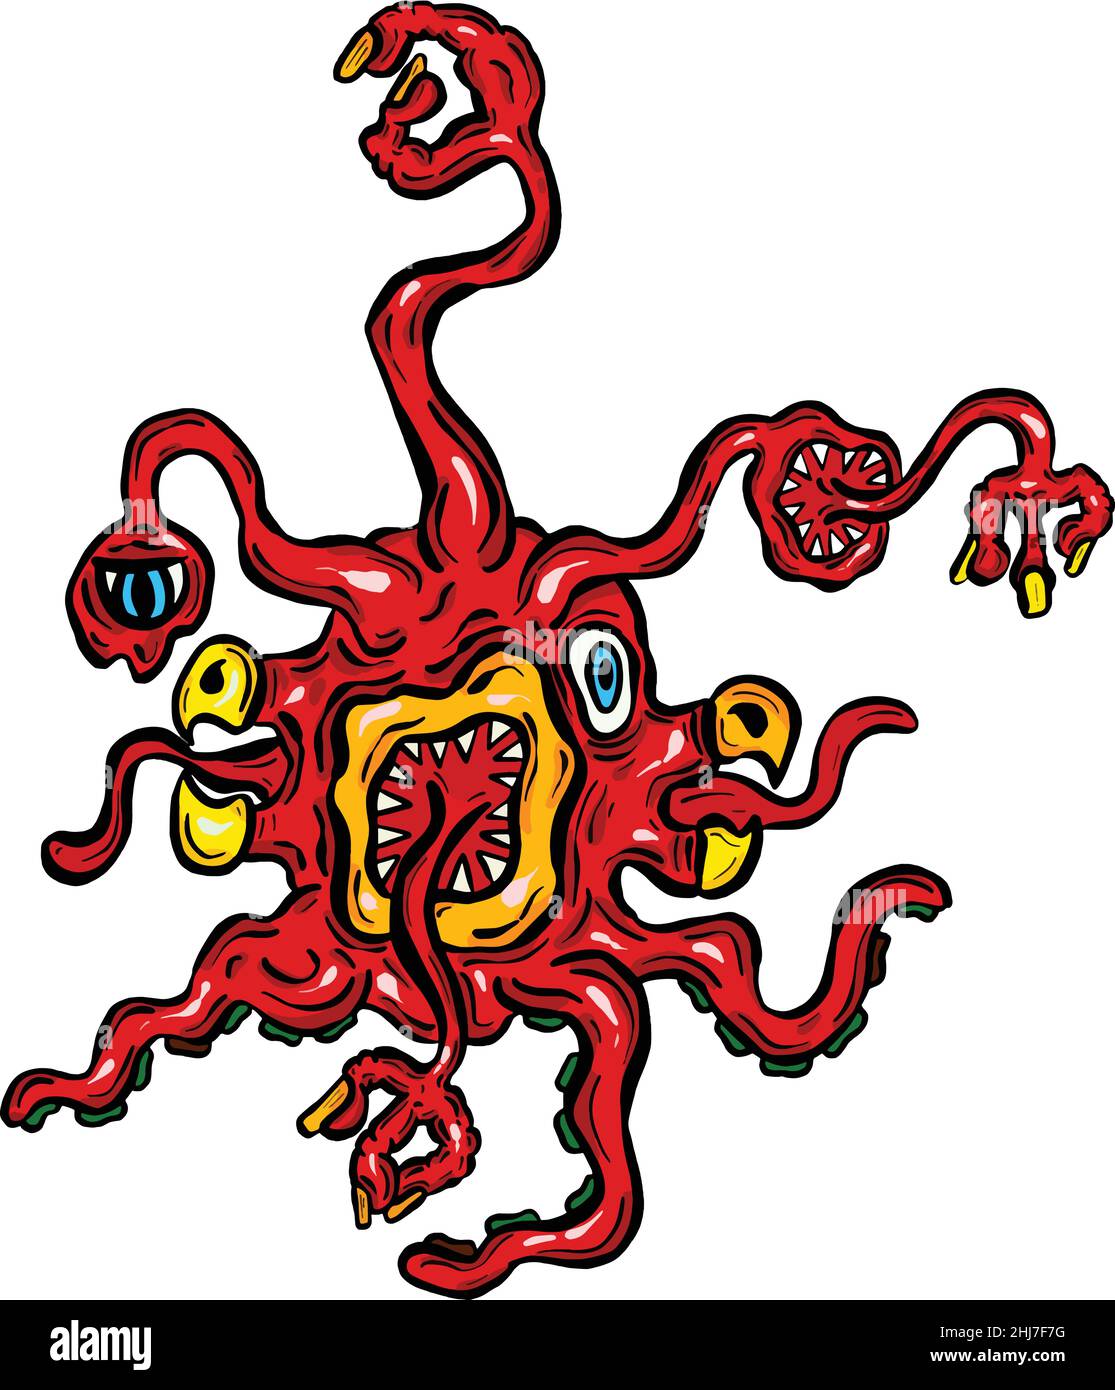 Weird Imaginary Alien Monster Creatures that Look Like Viruses or Parasites in a Cartoon Style Stock Vector